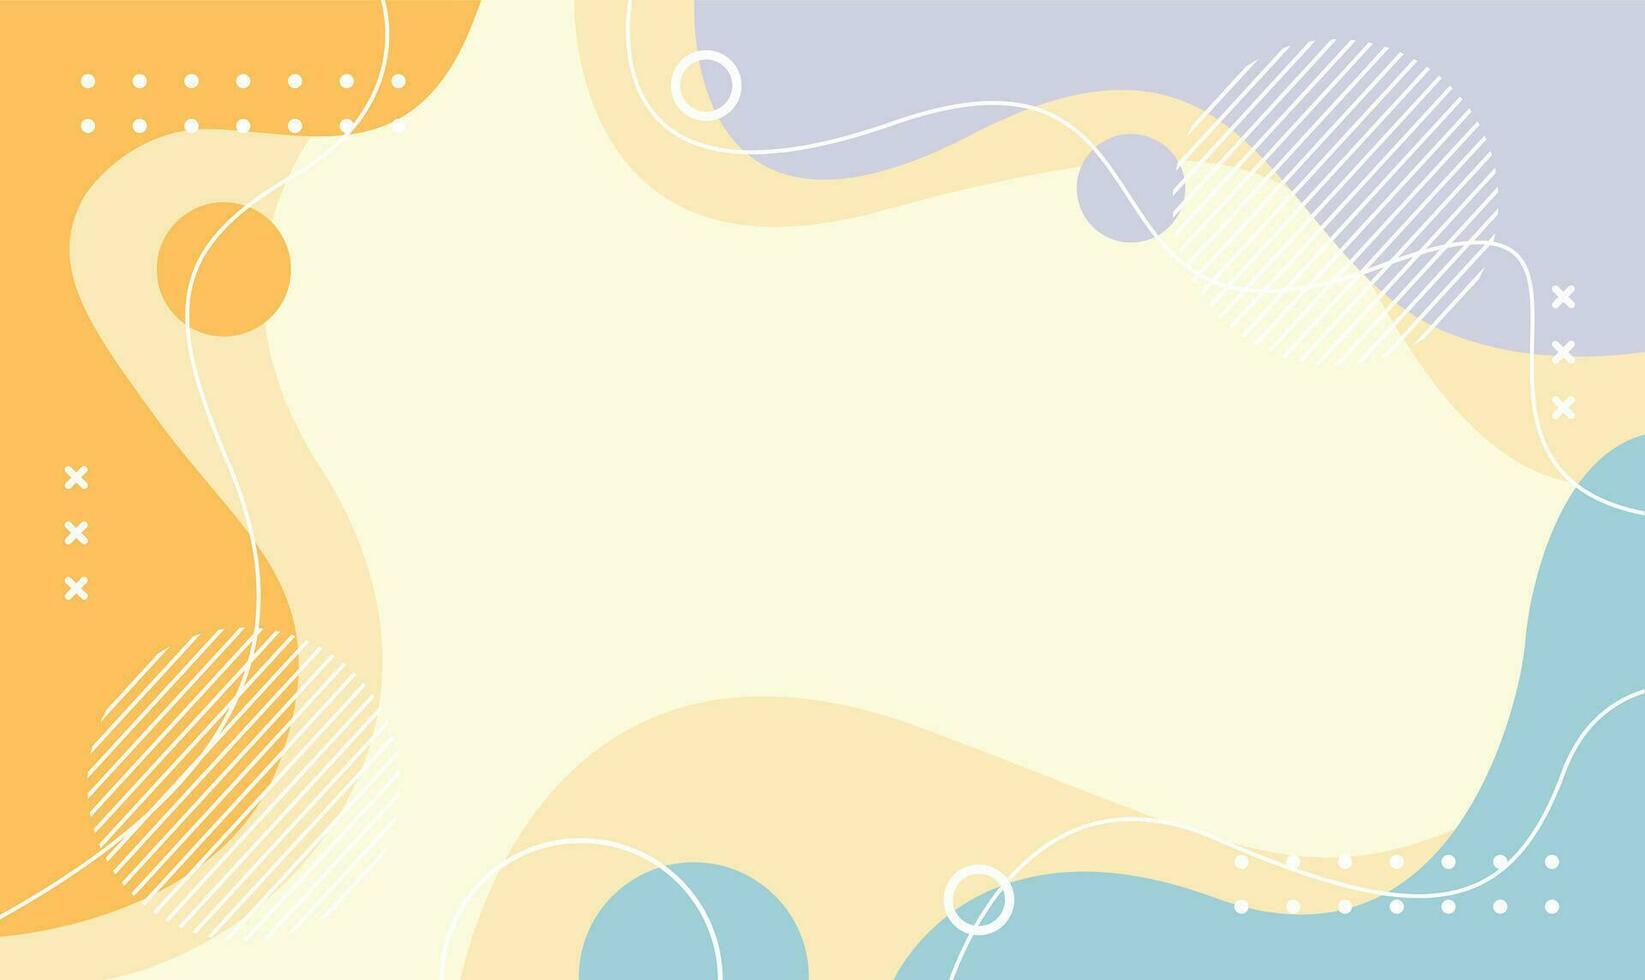 Abstract Vector Geometric Background. Wallpaper illustrations backdrop in pastel colors. Suitable for covers, poster designs, templates, banners and others